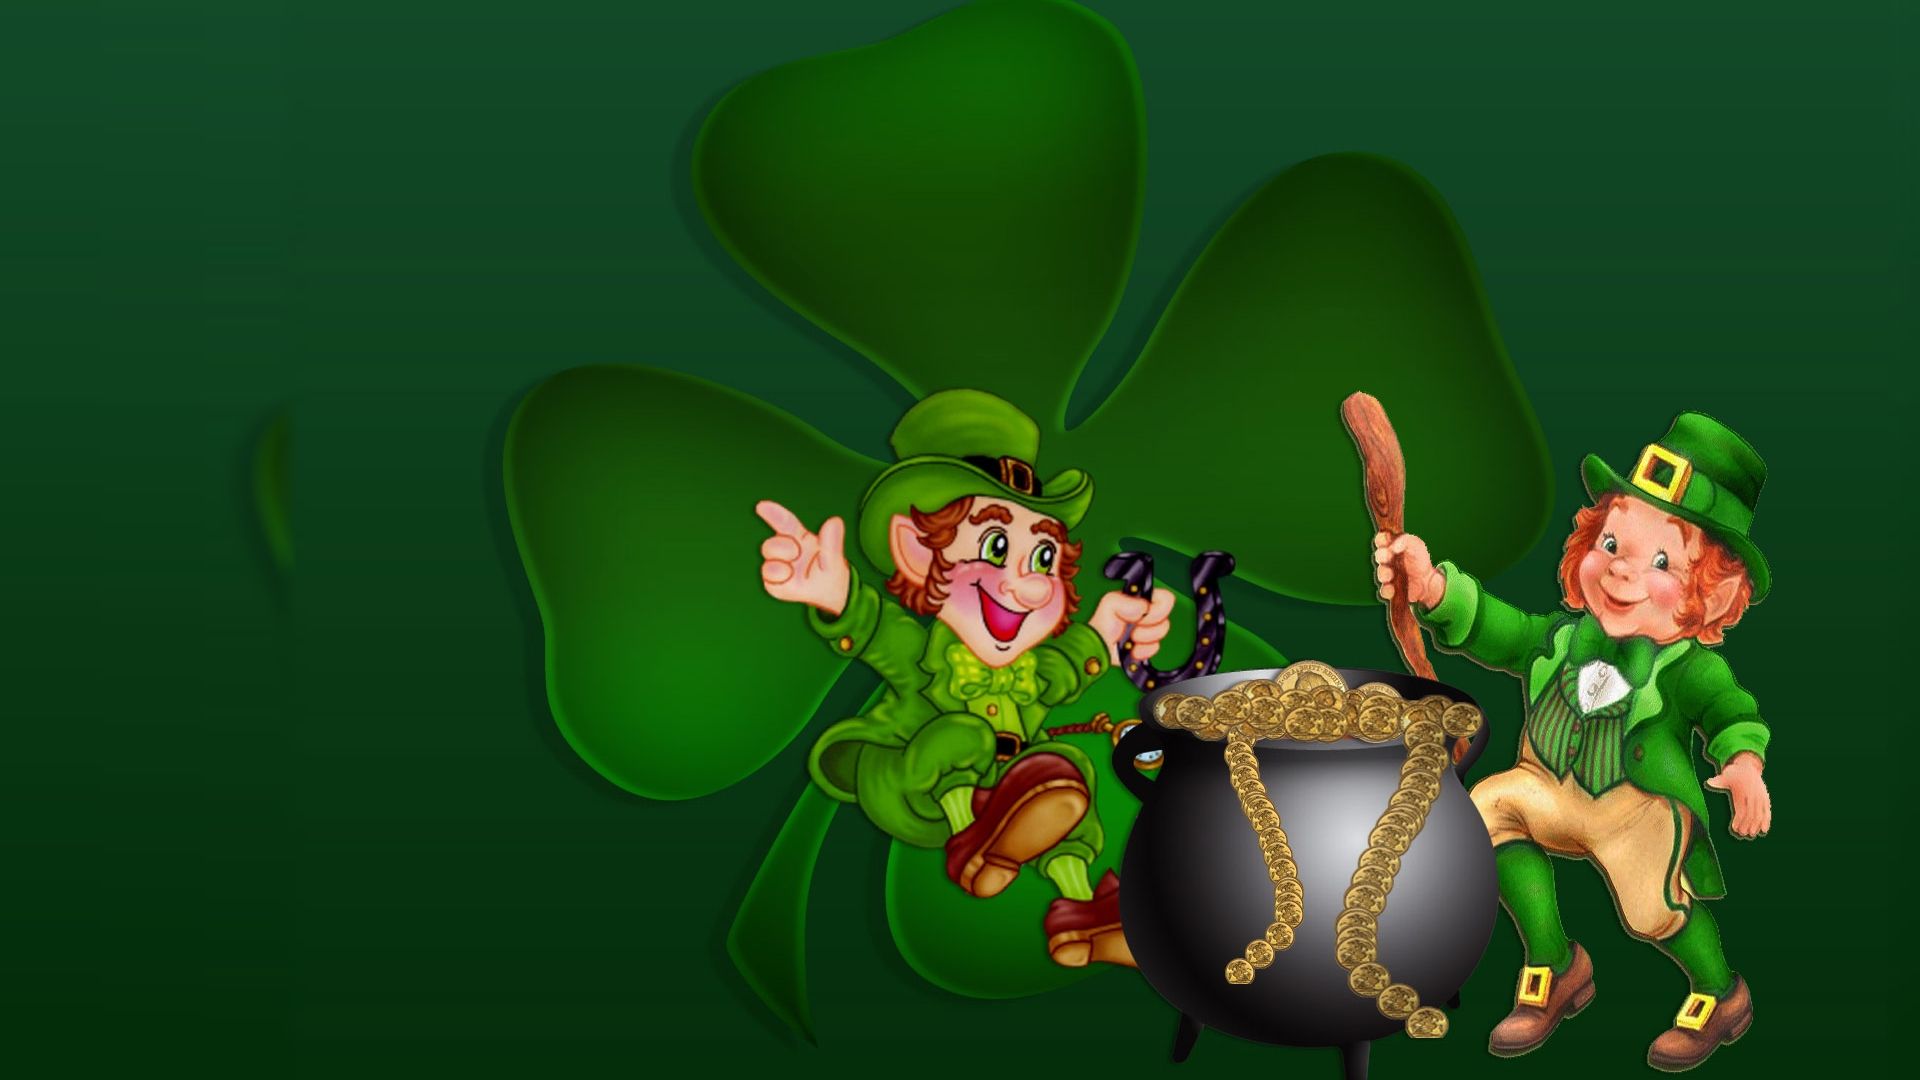 Cute St Patrick's Day Wallpaper